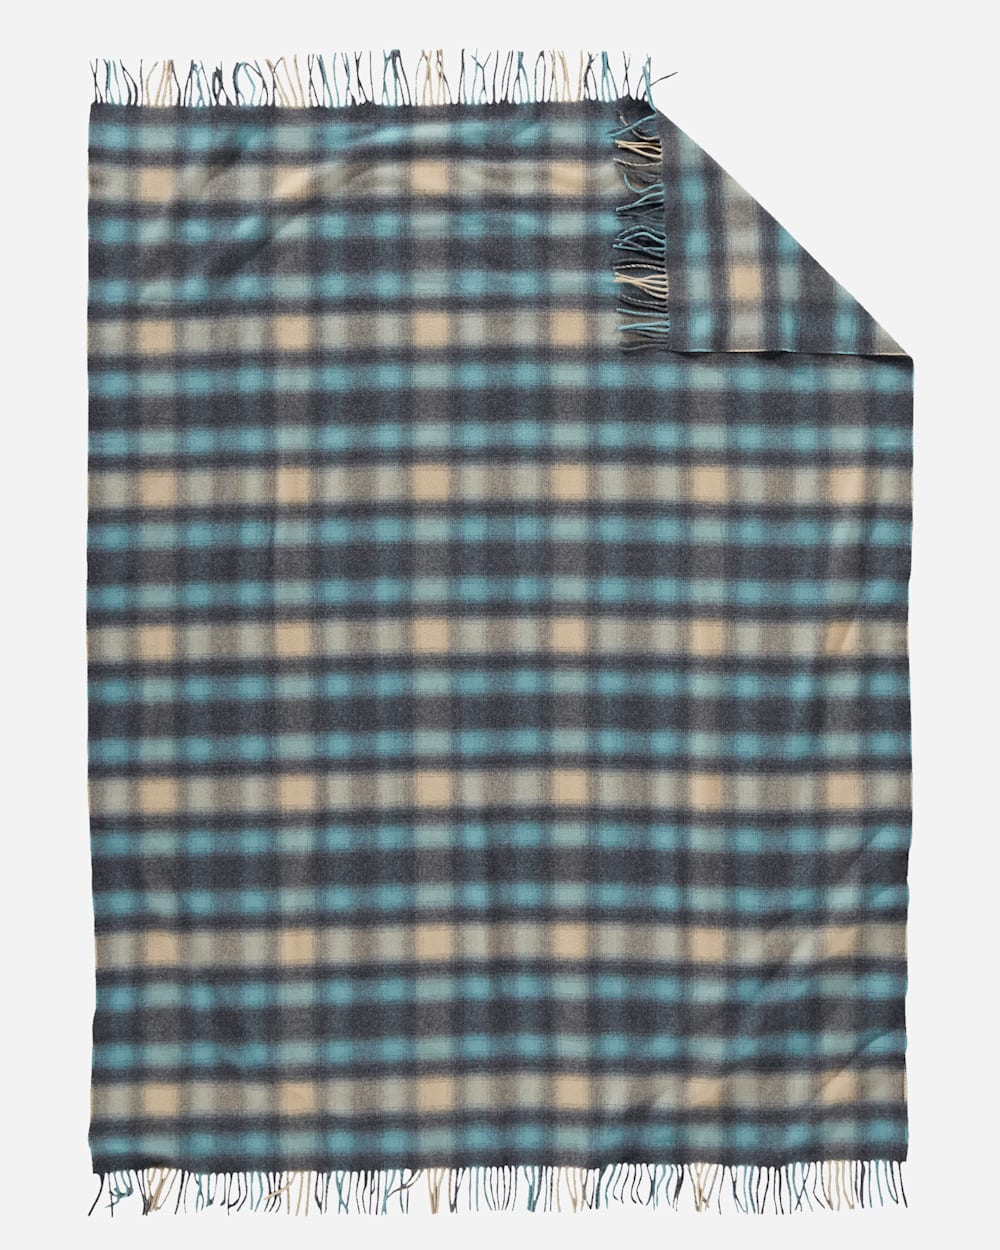 ADDITIONAL VIEW OF PLAID 5TH AVENUE MERINO THROW IN OCEAN OMBRE image number 2